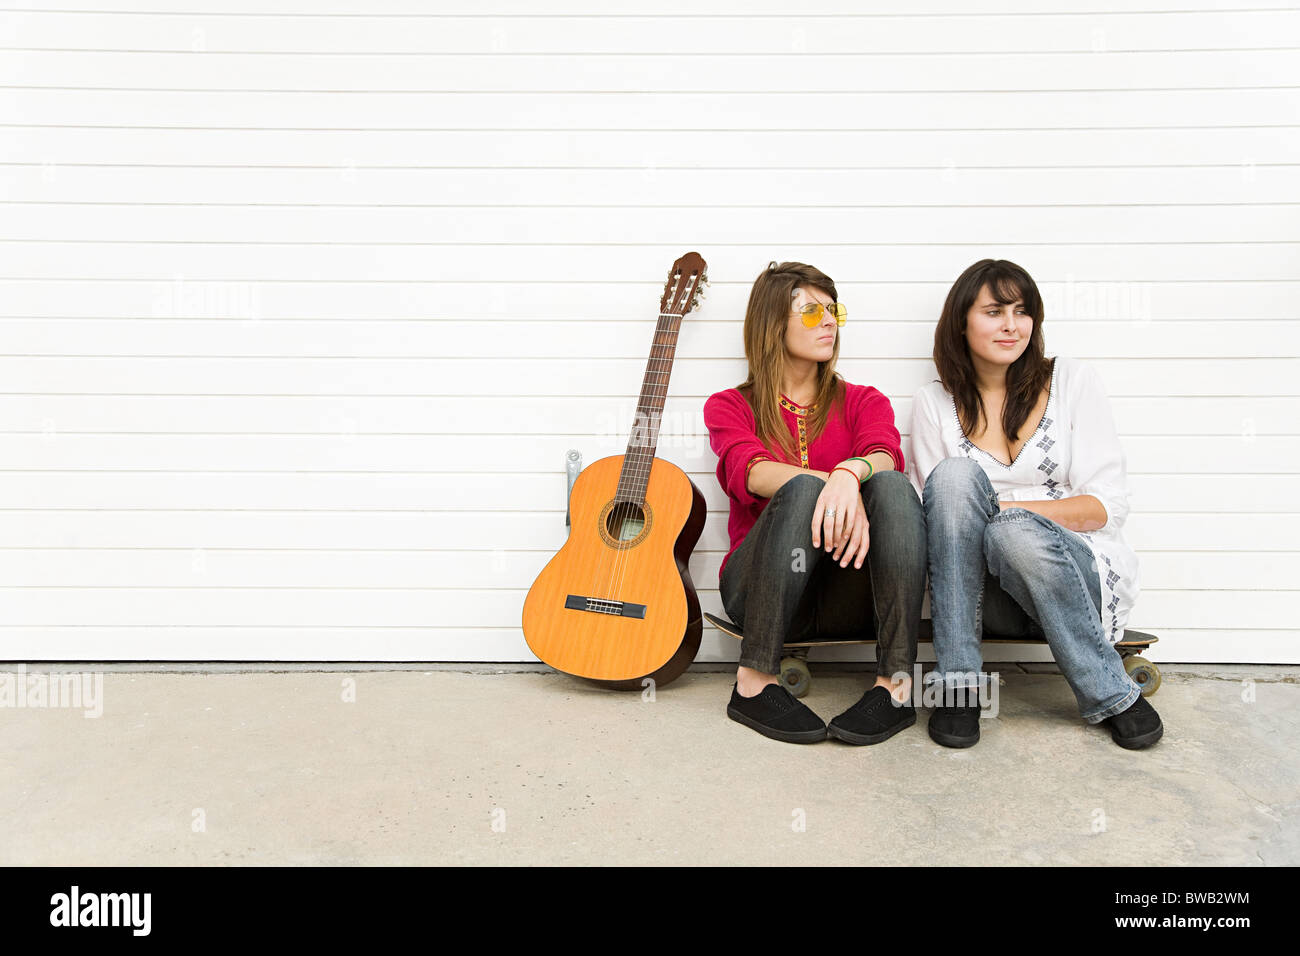 Two girls sitting on floor with guitar Stock Photo